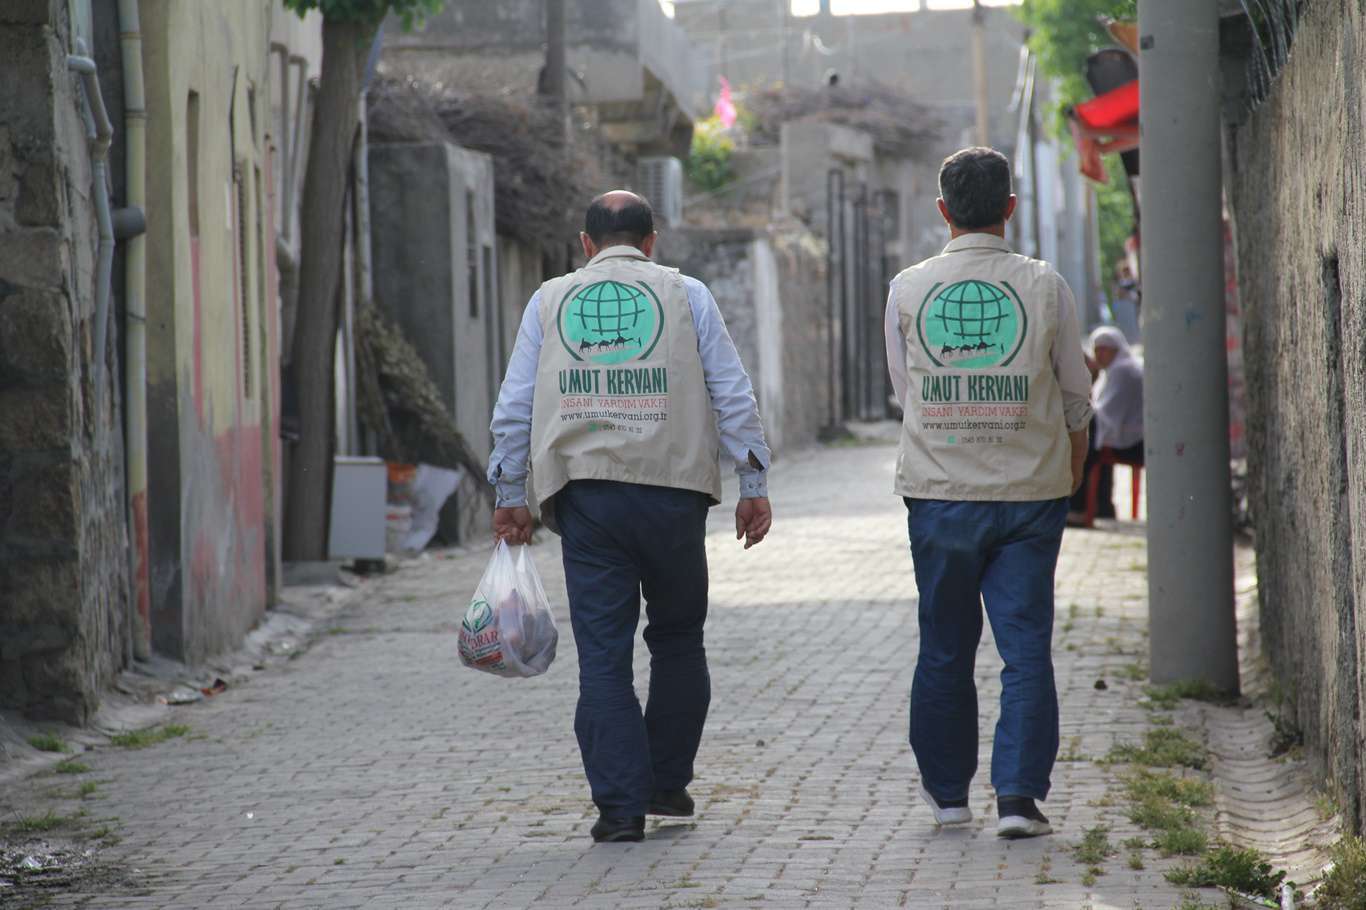 Hope Caravan provides food aid to hundreds of families in southeastern Turkey